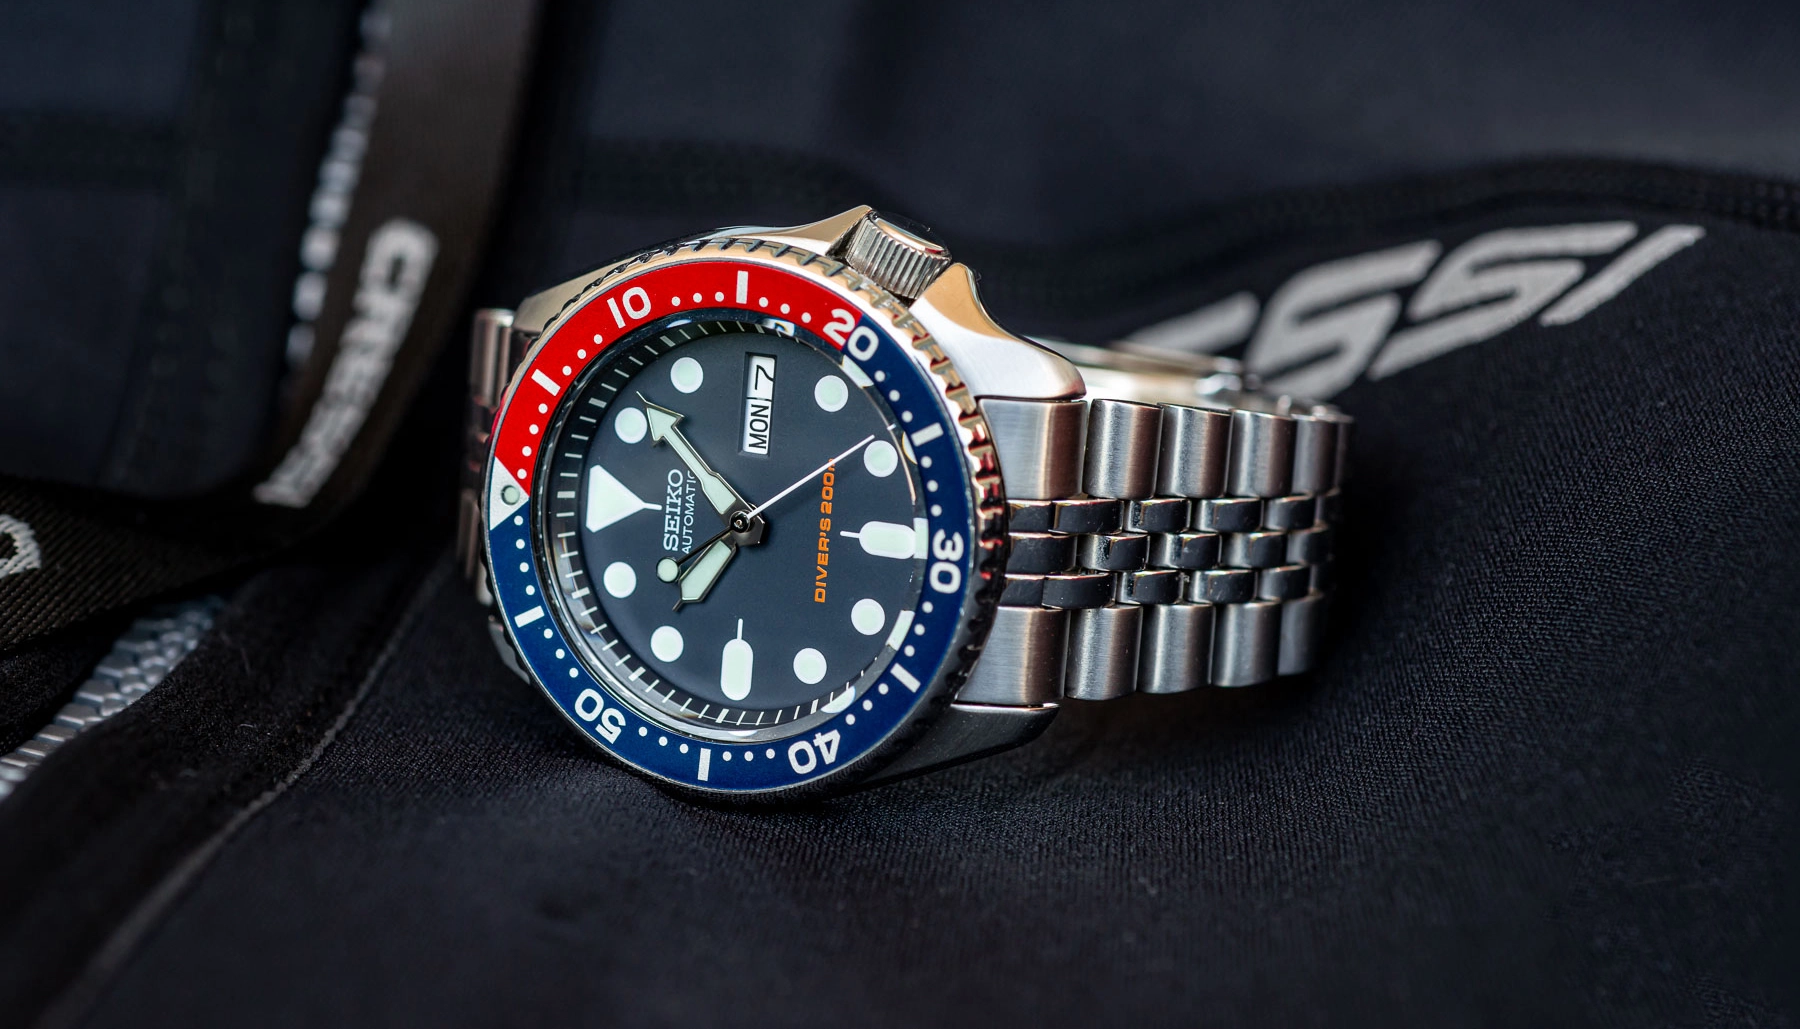 why the Seiko SKX the gateway for a watch nerds